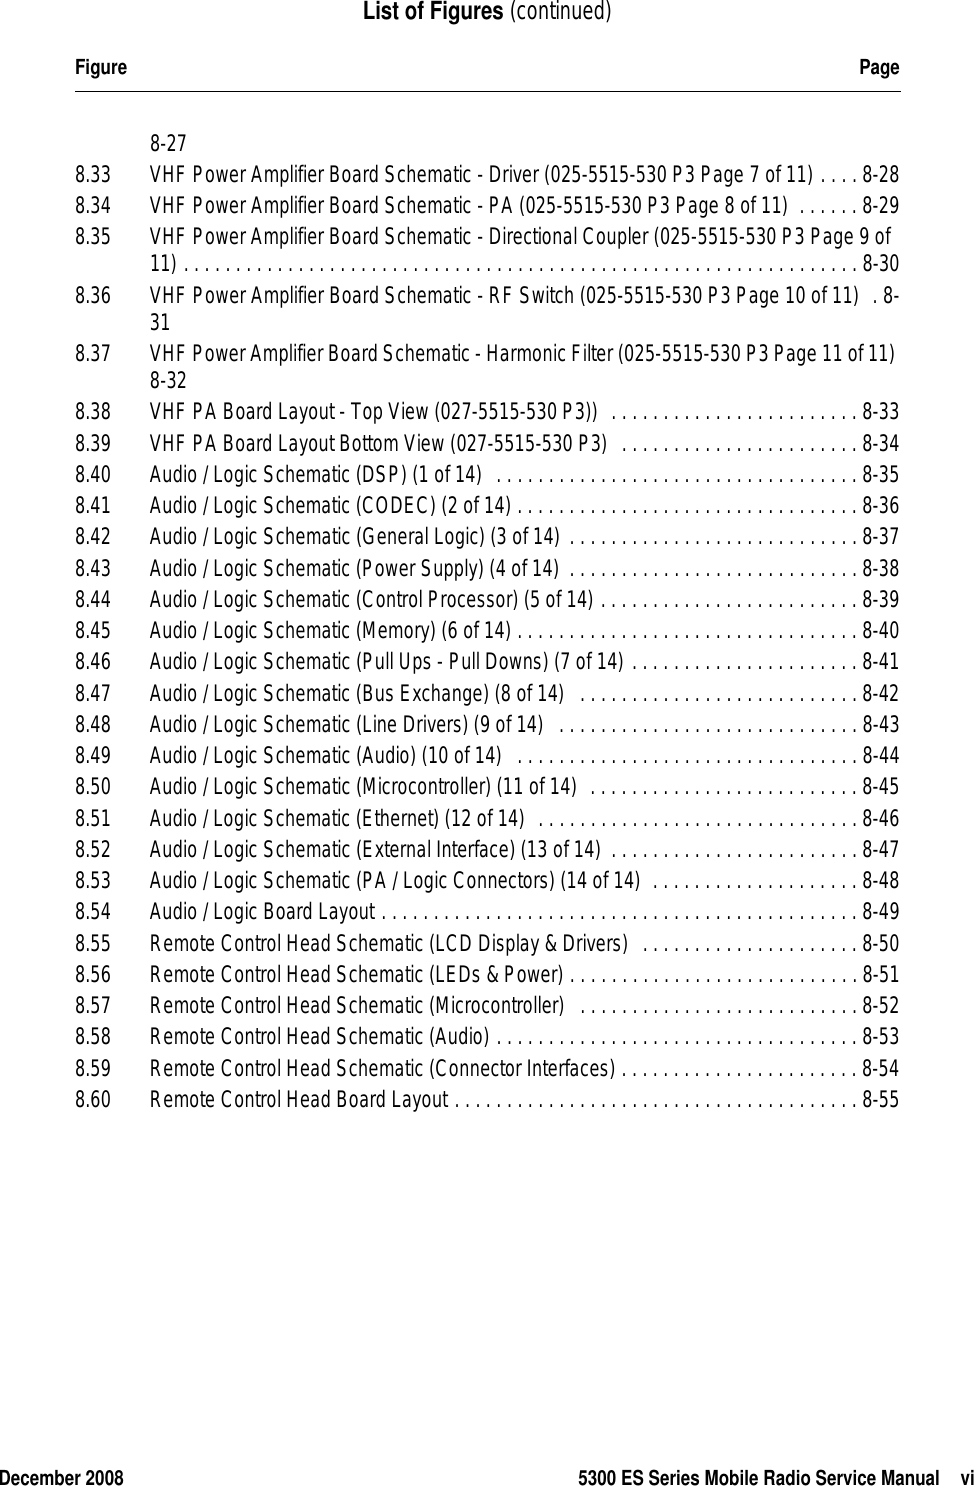 December 2008 5300 ES Series Mobile Radio Service Manual viList of Figures (continued)Figure Page8-278.33  VHF Power Amplifier Board Schematic - Driver (025-5515-530 P3 Page 7 of 11) . . . . 8-288.34  VHF Power Amplifier Board Schematic - PA (025-5515-530 P3 Page 8 of 11)  . . . . . . 8-298.35  VHF Power Amplifier Board Schematic - Directional Coupler (025-5515-530 P3 Page 9 of 11) . . . . . . . . . . . . . . . . . . . . . . . . . . . . . . . . . . . . . . . . . . . . . . . . . . . . . . . . . . . . . . . . . 8-308.36  VHF Power Amplifier Board Schematic - RF Switch (025-5515-530 P3 Page 10 of 11)  . 8-318.37  VHF Power Amplifier Board Schematic - Harmonic Filter (025-5515-530 P3 Page 11 of 11) 8-328.38  VHF PA Board Layout - Top View (027-5515-530 P3))  . . . . . . . . . . . . . . . . . . . . . . . . 8-338.39  VHF PA Board Layout Bottom View (027-5515-530 P3)  . . . . . . . . . . . . . . . . . . . . . . . 8-348.40  Audio / Logic Schematic (DSP) (1 of 14)  . . . . . . . . . . . . . . . . . . . . . . . . . . . . . . . . . . . 8-358.41  Audio / Logic Schematic (CODEC) (2 of 14) . . . . . . . . . . . . . . . . . . . . . . . . . . . . . . . . . 8-368.42  Audio / Logic Schematic (General Logic) (3 of 14) . . . . . . . . . . . . . . . . . . . . . . . . . . . . 8-378.43  Audio / Logic Schematic (Power Supply) (4 of 14) . . . . . . . . . . . . . . . . . . . . . . . . . . . . 8-388.44  Audio / Logic Schematic (Control Processor) (5 of 14) . . . . . . . . . . . . . . . . . . . . . . . . . 8-398.45  Audio / Logic Schematic (Memory) (6 of 14) . . . . . . . . . . . . . . . . . . . . . . . . . . . . . . . . . 8-408.46  Audio / Logic Schematic (Pull Ups - Pull Downs) (7 of 14) . . . . . . . . . . . . . . . . . . . . . . 8-418.47  Audio / Logic Schematic (Bus Exchange) (8 of 14)   . . . . . . . . . . . . . . . . . . . . . . . . . . . 8-428.48  Audio / Logic Schematic (Line Drivers) (9 of 14)   . . . . . . . . . . . . . . . . . . . . . . . . . . . . . 8-438.49  Audio / Logic Schematic (Audio) (10 of 14)   . . . . . . . . . . . . . . . . . . . . . . . . . . . . . . . . . 8-448.50  Audio / Logic Schematic (Microcontroller) (11 of 14)  . . . . . . . . . . . . . . . . . . . . . . . . . . 8-458.51  Audio / Logic Schematic (Ethernet) (12 of 14)  . . . . . . . . . . . . . . . . . . . . . . . . . . . . . . . 8-468.52  Audio / Logic Schematic (External Interface) (13 of 14)  . . . . . . . . . . . . . . . . . . . . . . . . 8-478.53  Audio / Logic Schematic (PA / Logic Connectors) (14 of 14)  . . . . . . . . . . . . . . . . . . . . 8-488.54  Audio / Logic Board Layout . . . . . . . . . . . . . . . . . . . . . . . . . . . . . . . . . . . . . . . . . . . . . . 8-498.55  Remote Control Head Schematic (LCD Display &amp; Drivers)  . . . . . . . . . . . . . . . . . . . . . 8-508.56  Remote Control Head Schematic (LEDs &amp; Power) . . . . . . . . . . . . . . . . . . . . . . . . . . . . 8-518.57  Remote Control Head Schematic (Microcontroller)   . . . . . . . . . . . . . . . . . . . . . . . . . . . 8-528.58  Remote Control Head Schematic (Audio) . . . . . . . . . . . . . . . . . . . . . . . . . . . . . . . . . . . 8-538.59  Remote Control Head Schematic (Connector Interfaces) . . . . . . . . . . . . . . . . . . . . . . . 8-548.60  Remote Control Head Board Layout . . . . . . . . . . . . . . . . . . . . . . . . . . . . . . . . . . . . . . . 8-55